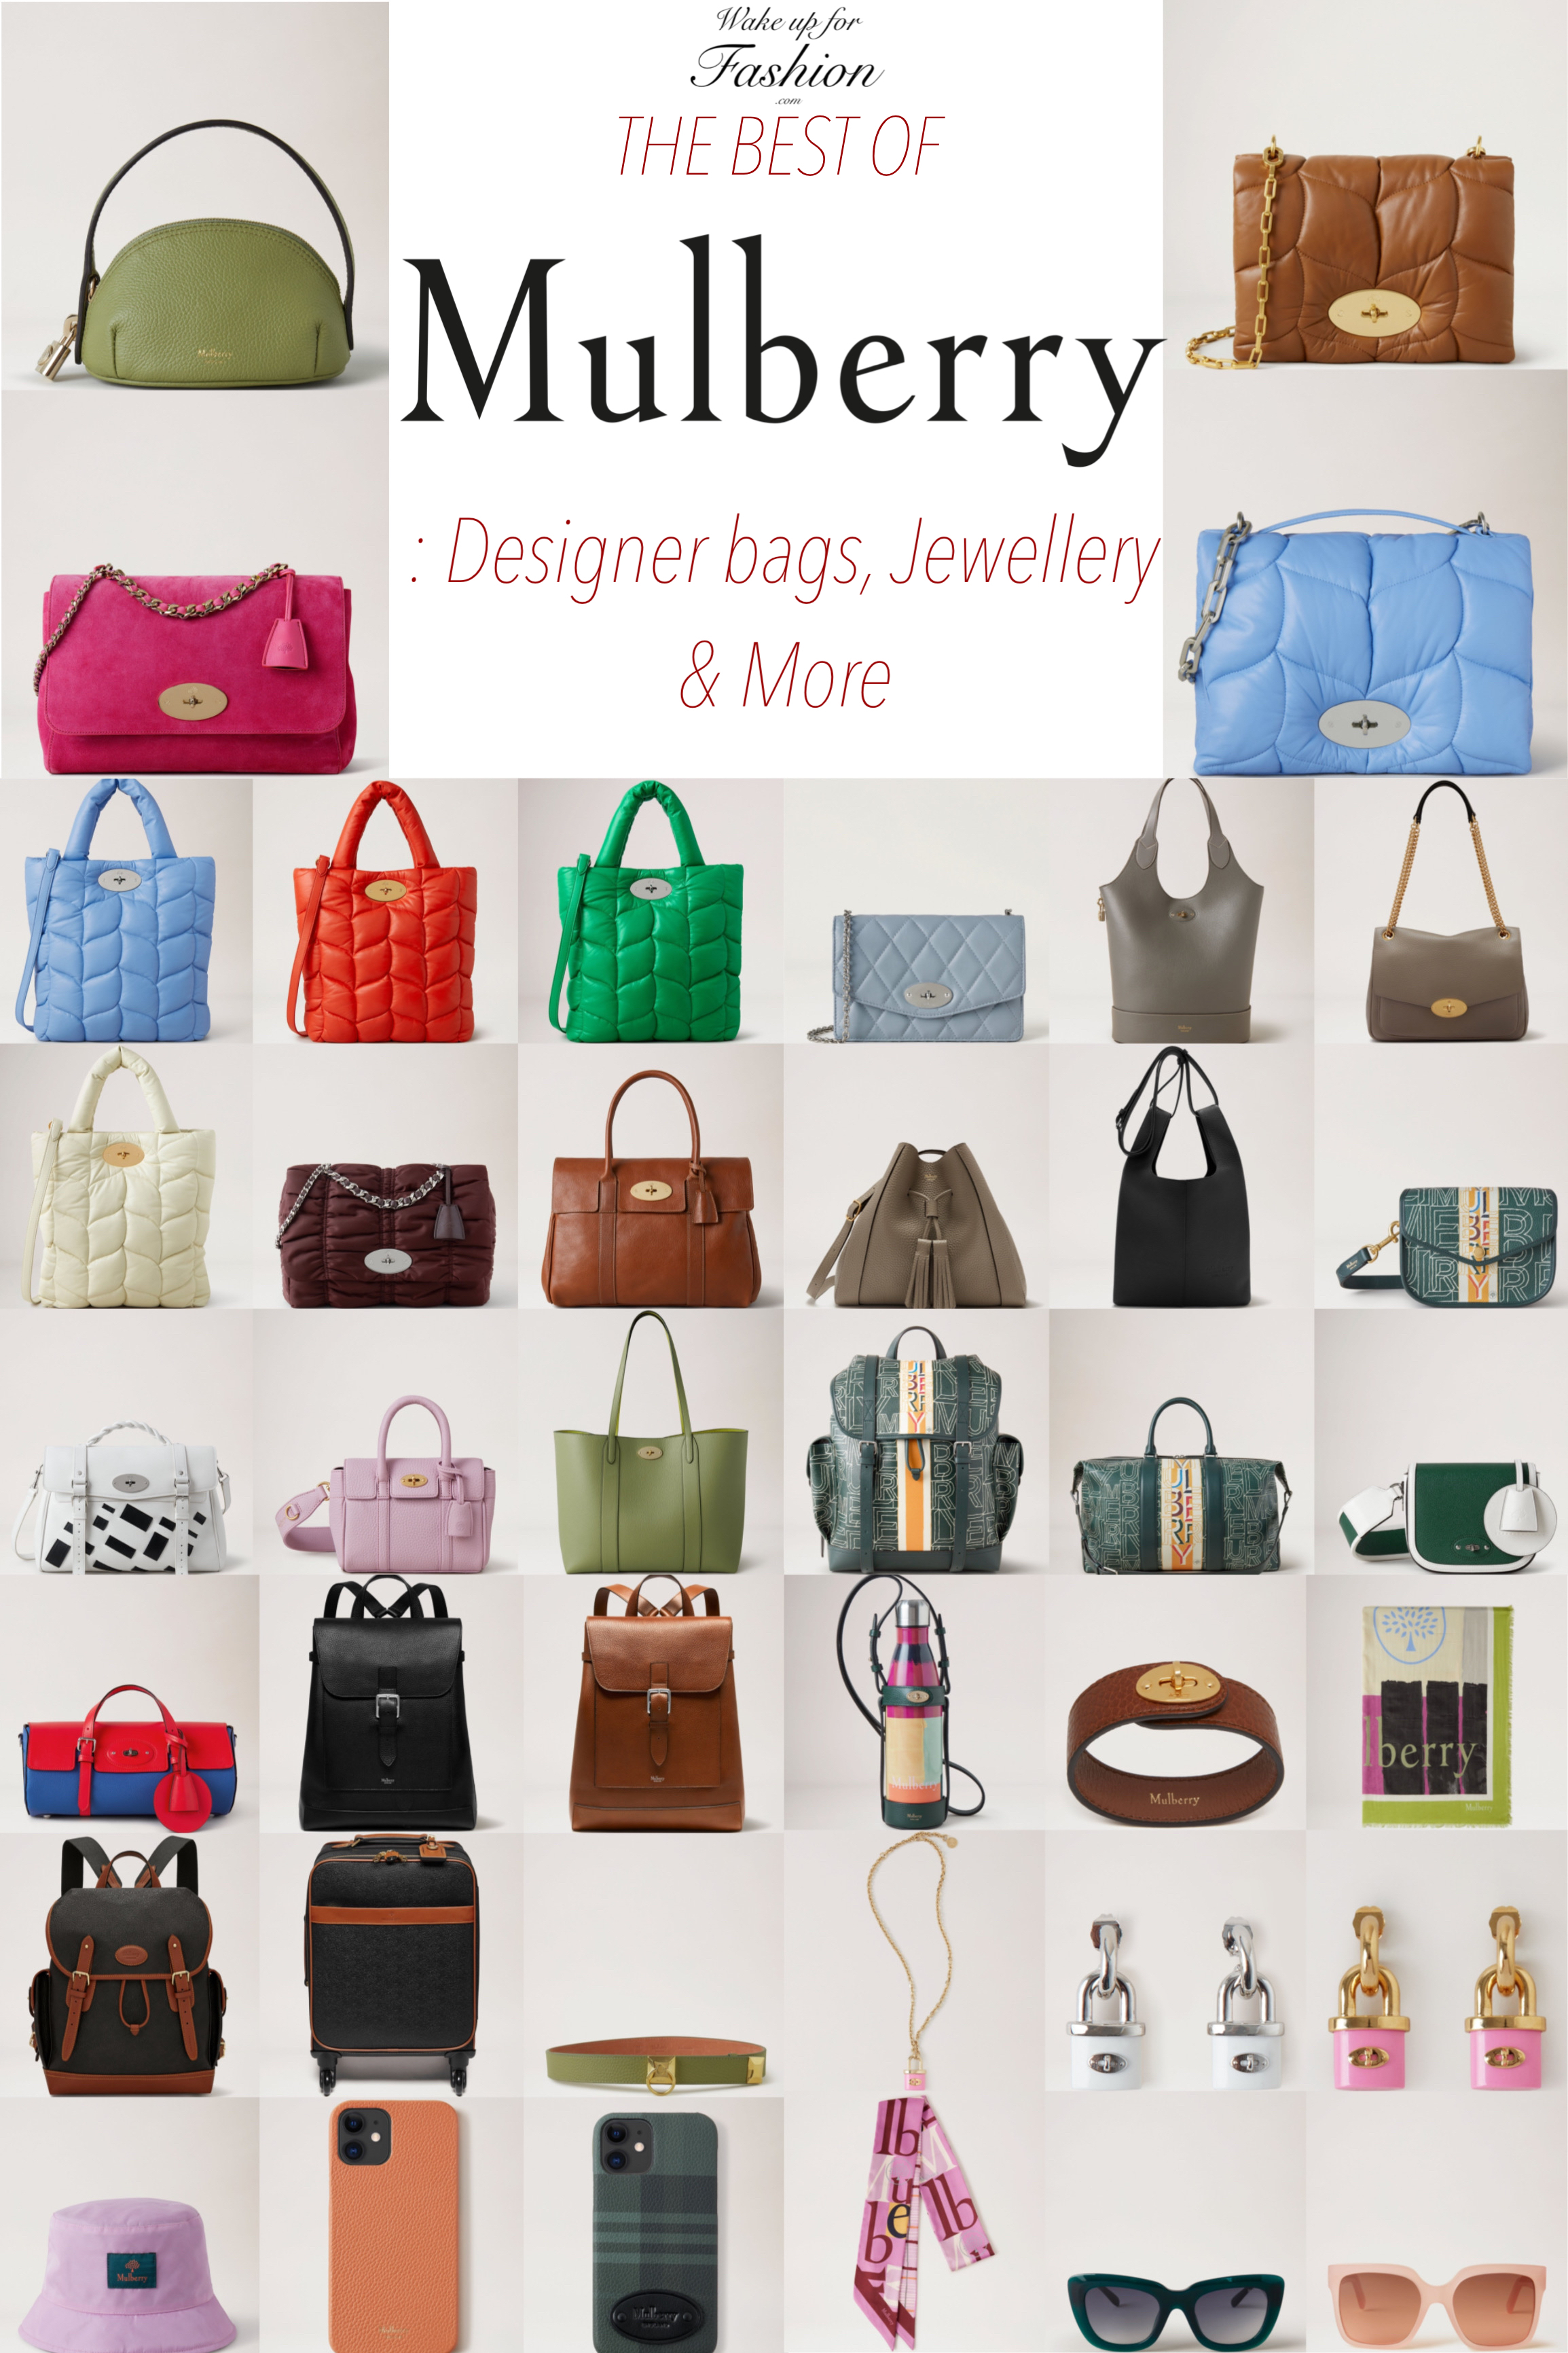 The Best of Mulberry : Designer bags, Jewellery & More